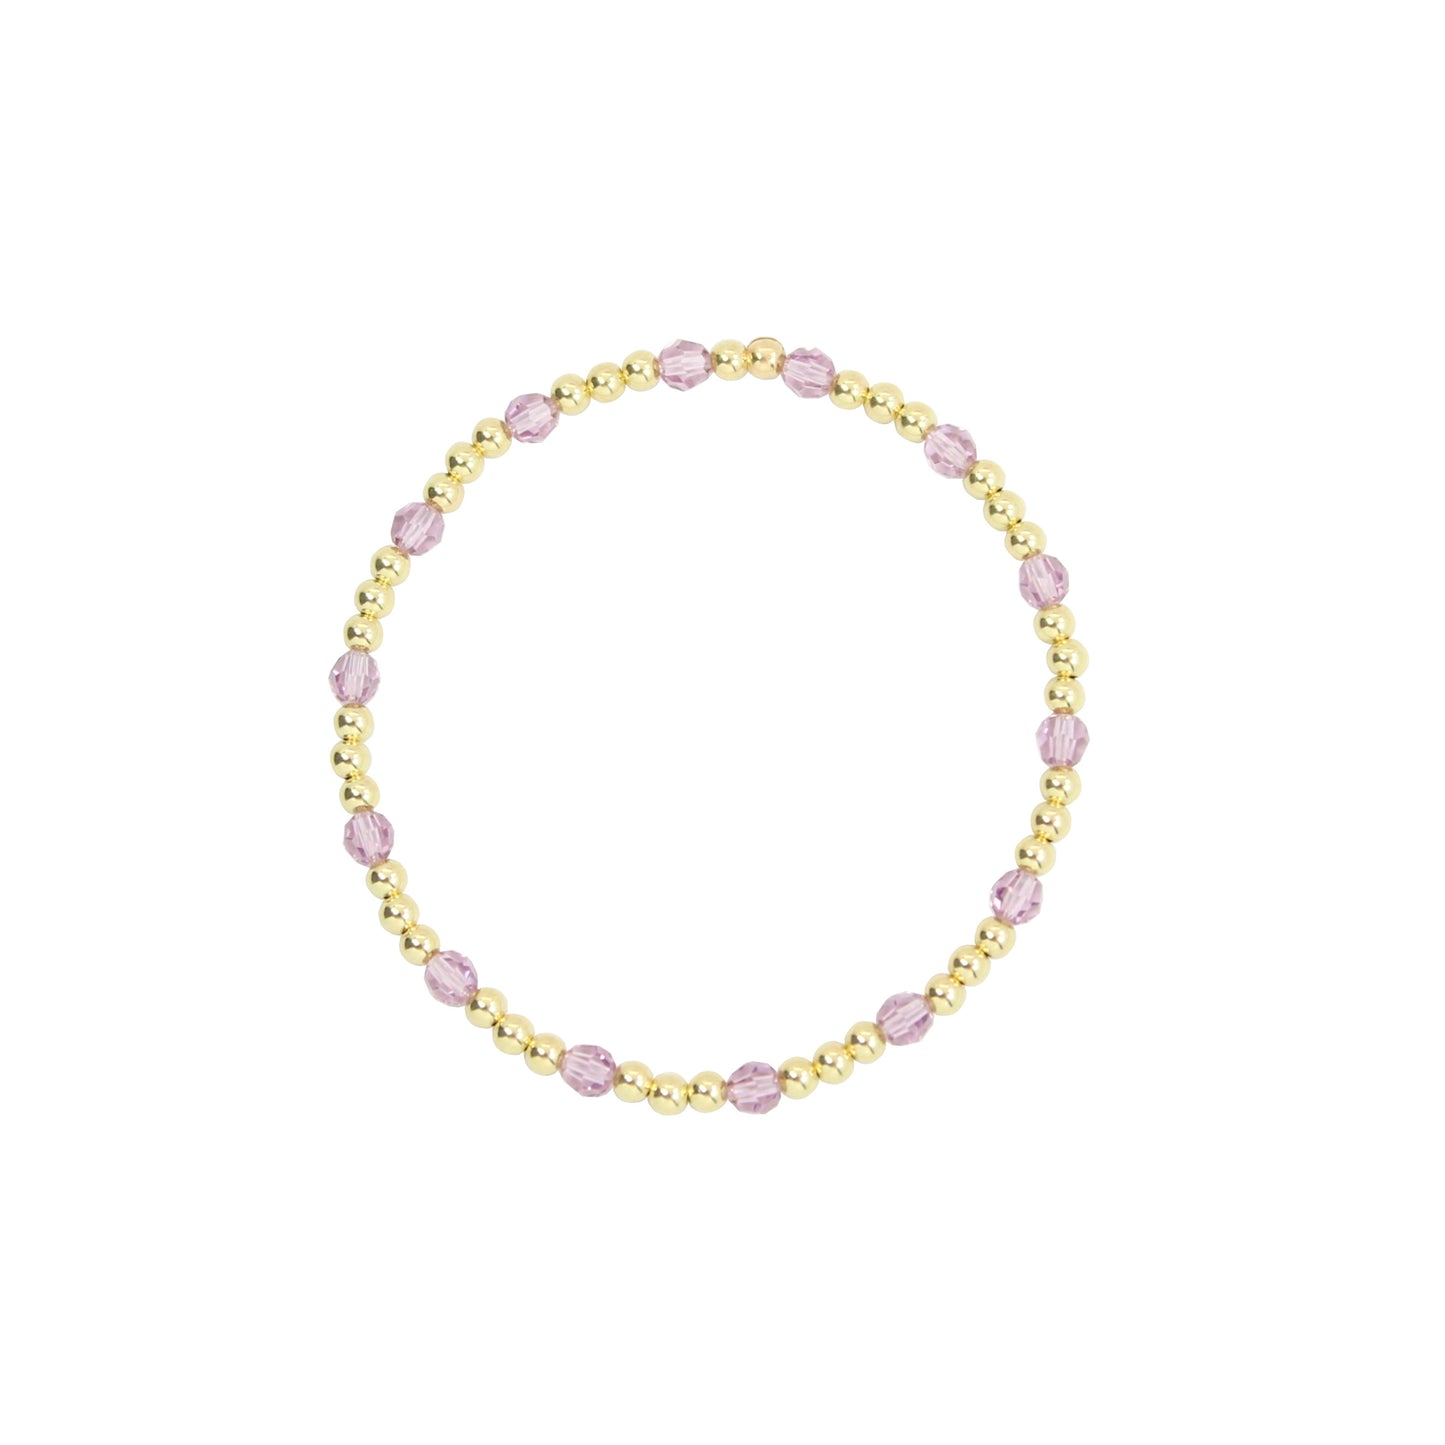 Stretchy June Birthstone Adult Dotted Bracelet (3MM + 4MM beads)